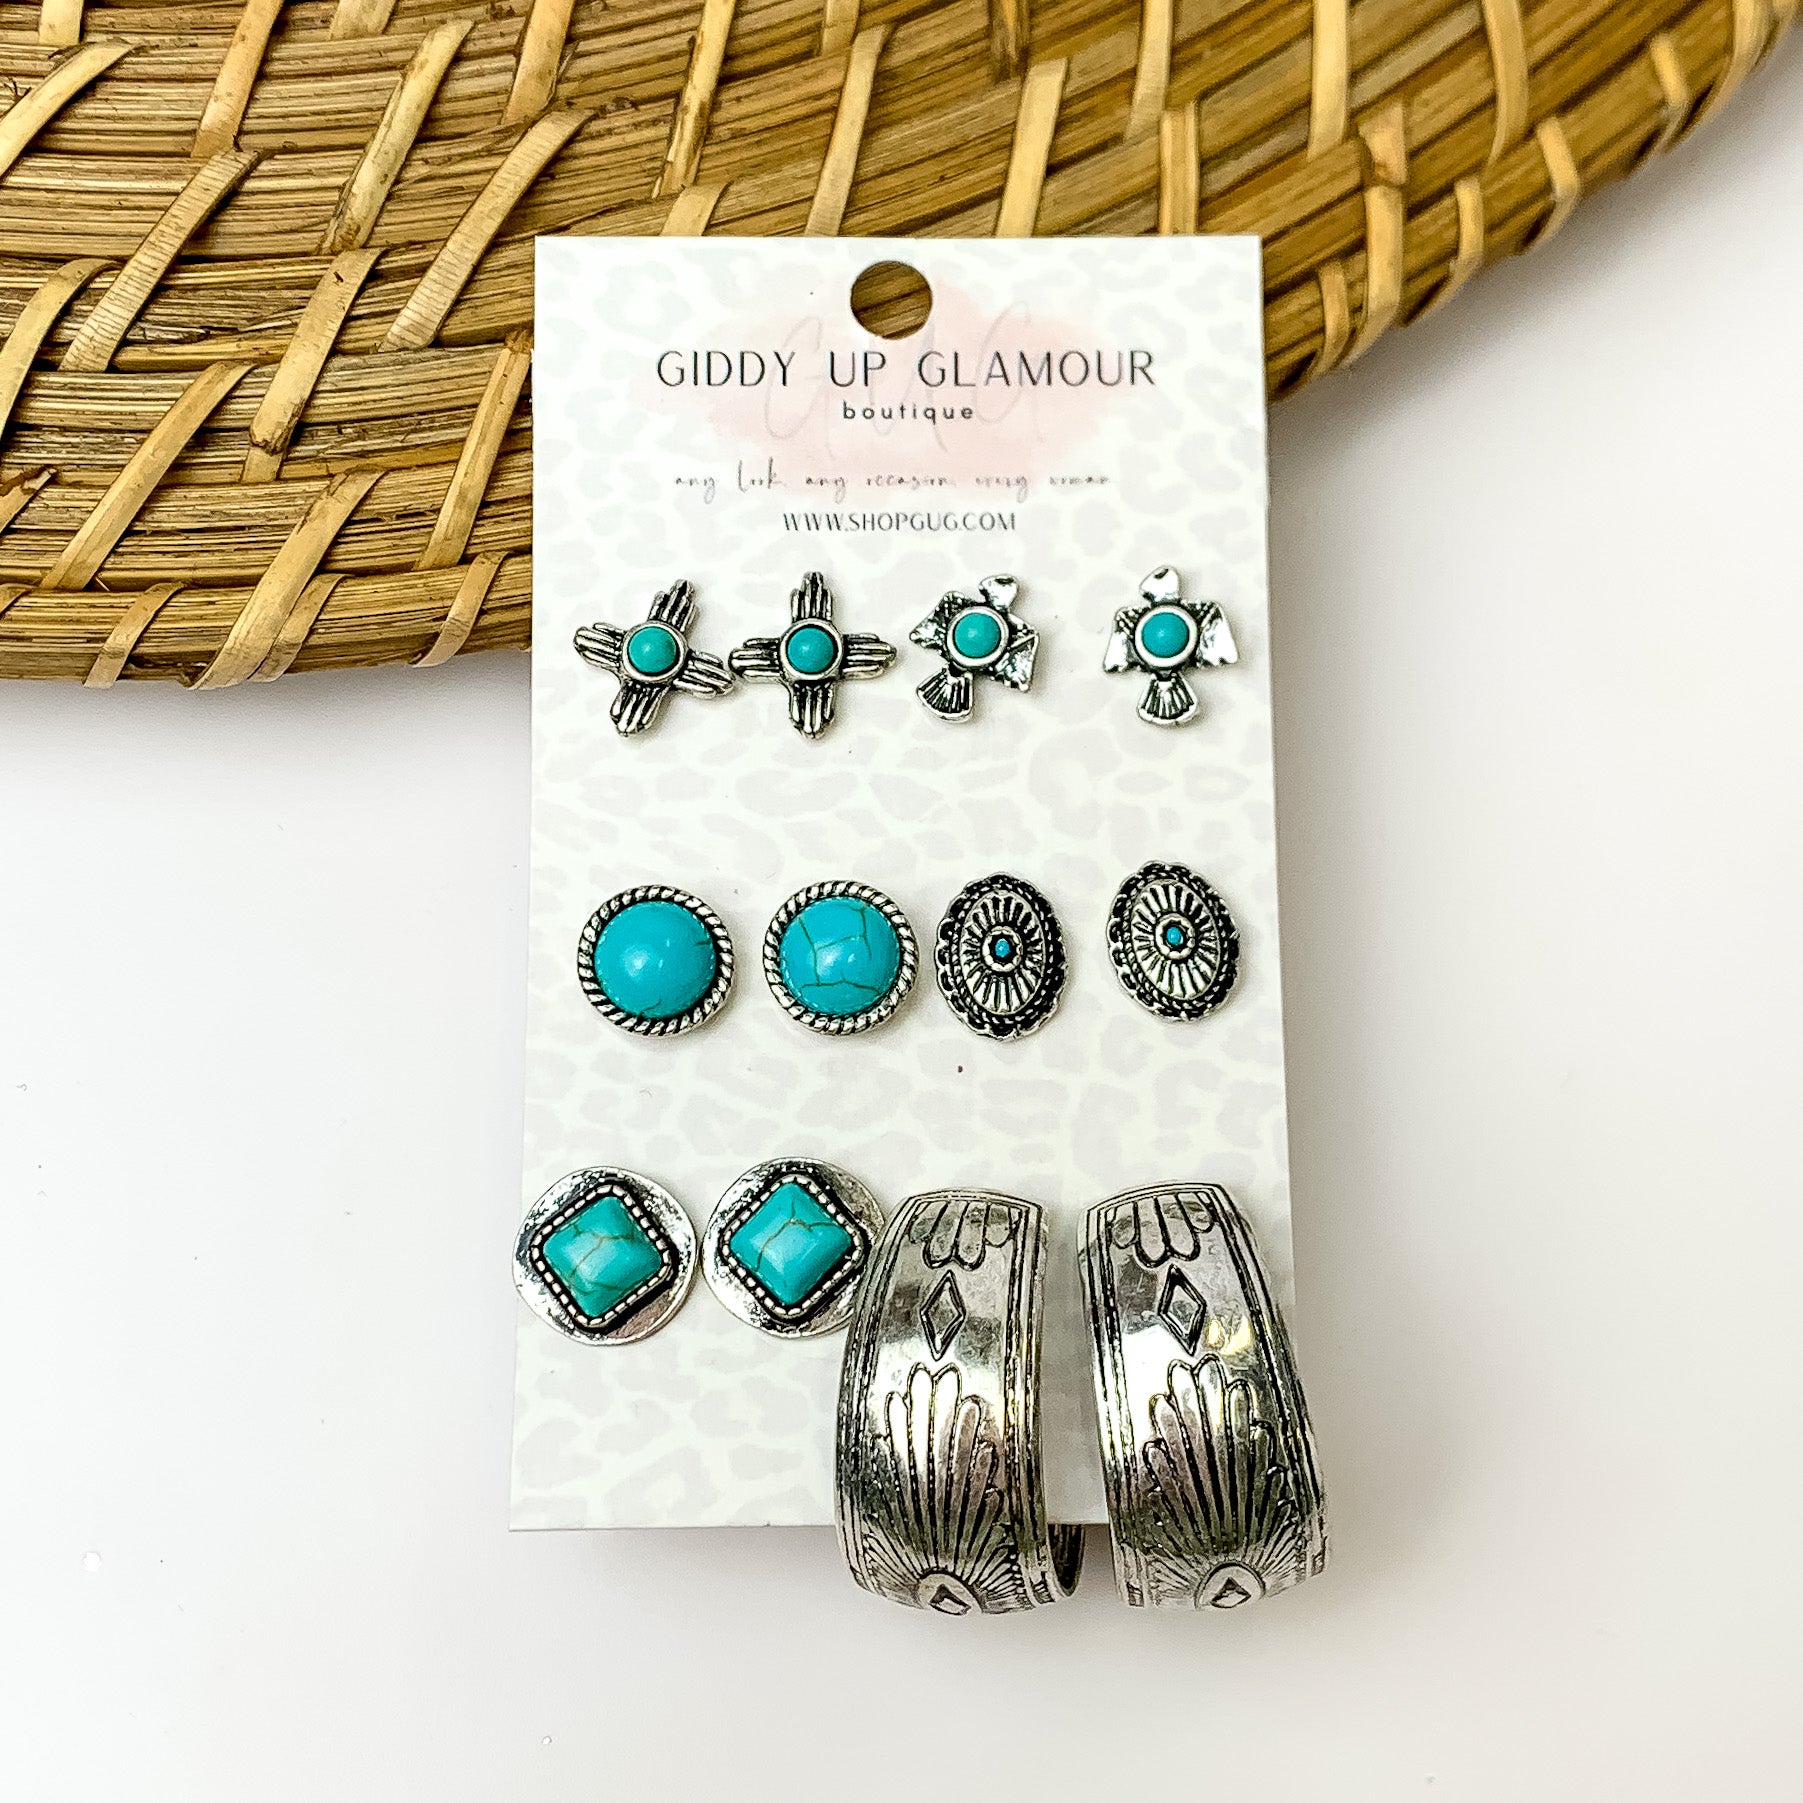 Set of six turquoise and silver designed stud earrings. On a white background with wood textured design in the top left.